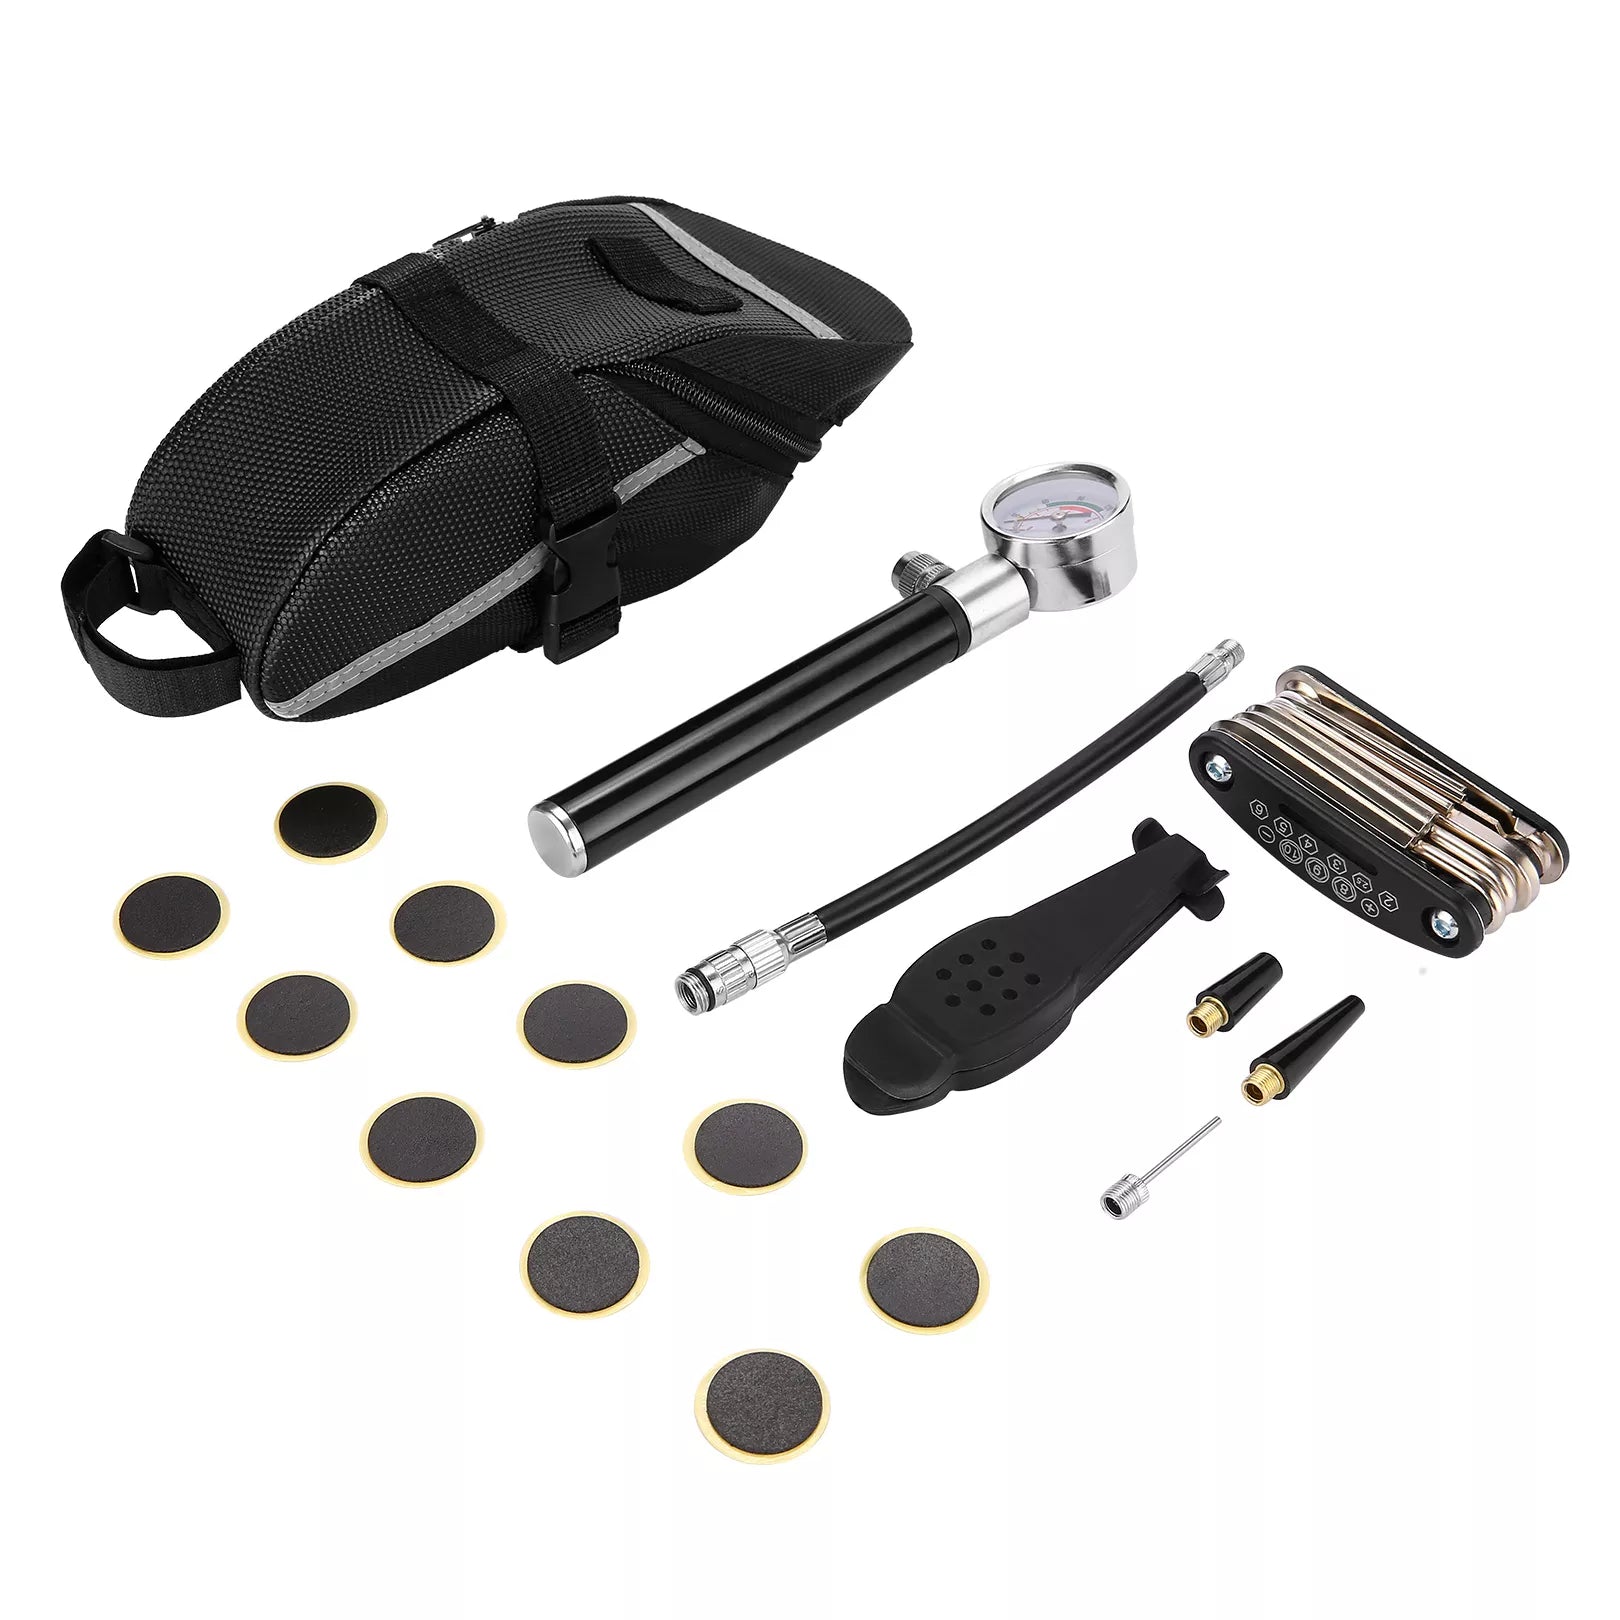 The E-Bike Repair Tool Kit contains a complete set of emergency tire tools in a compact and lightweight package that can be easily mounted on the handlebars. The tool kit weighs 0.6 kg and contains a portable pump, air outlet basketball needle, portable tool, 10 tire patches and 4 screws. This E-Bike Repair Tool Kit ensures you are always prepared.